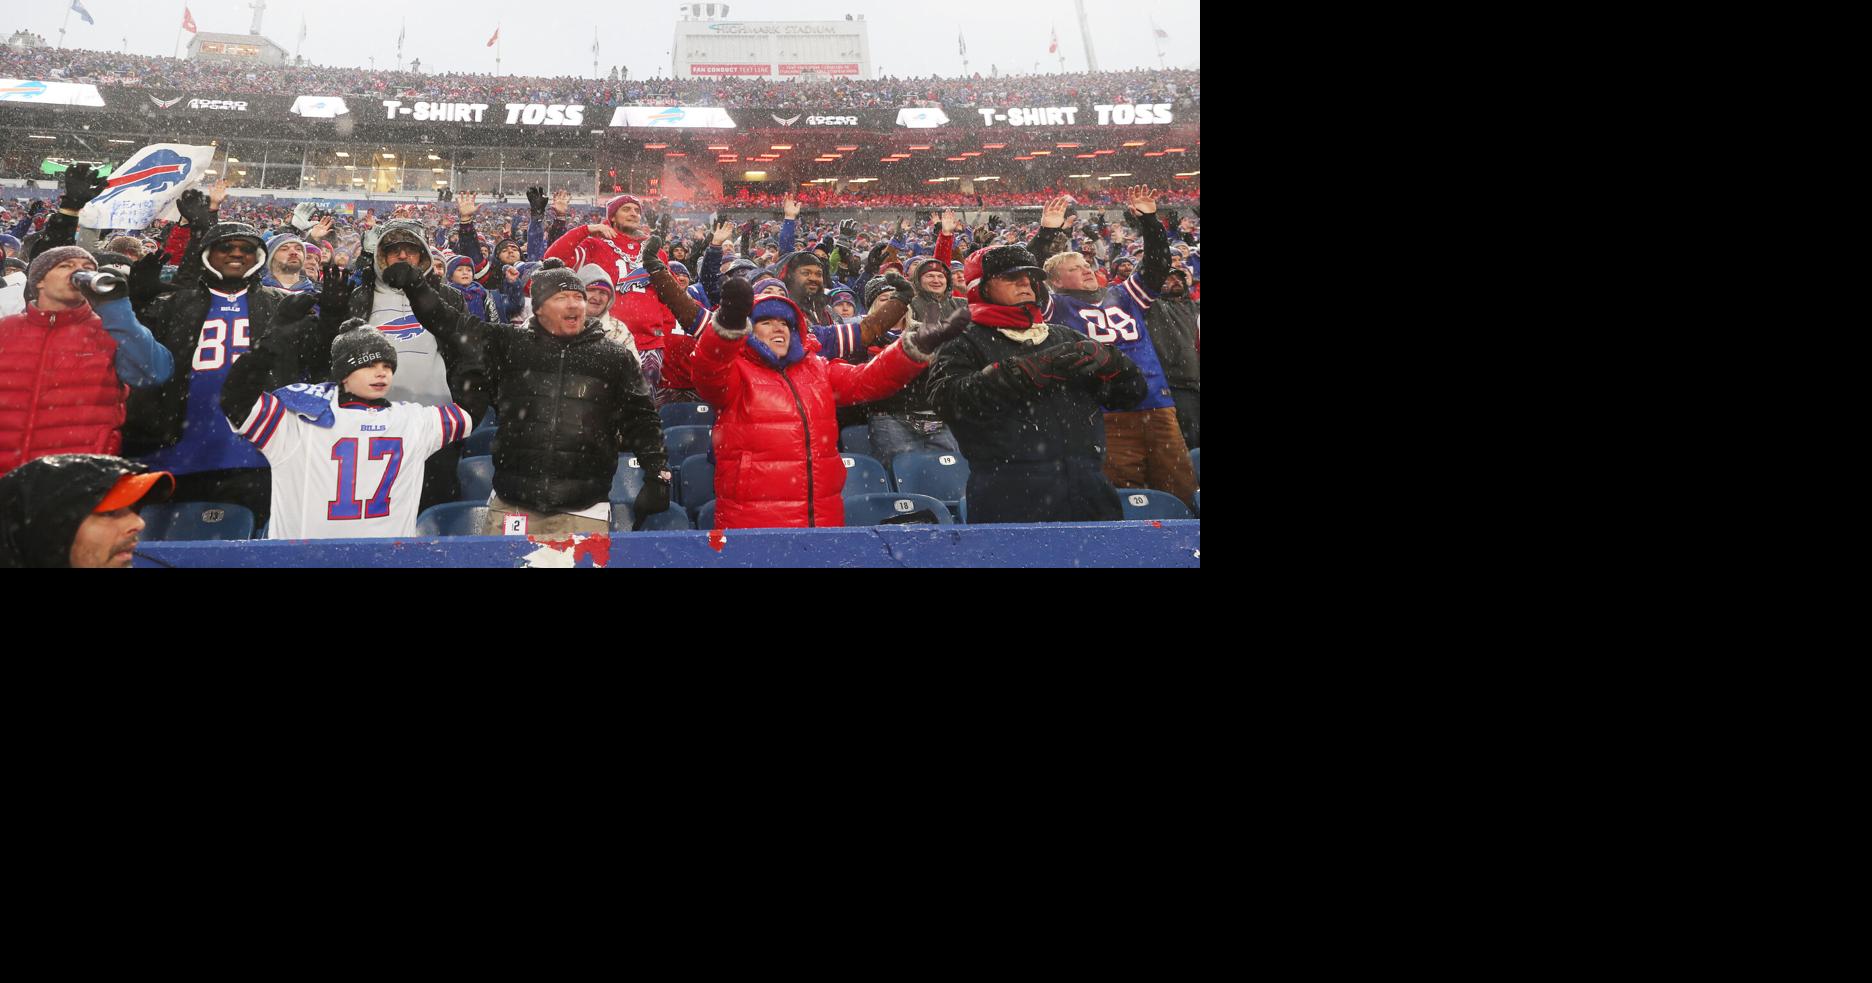 Buffalo Bills tickets prices set to increase for the 2022 season